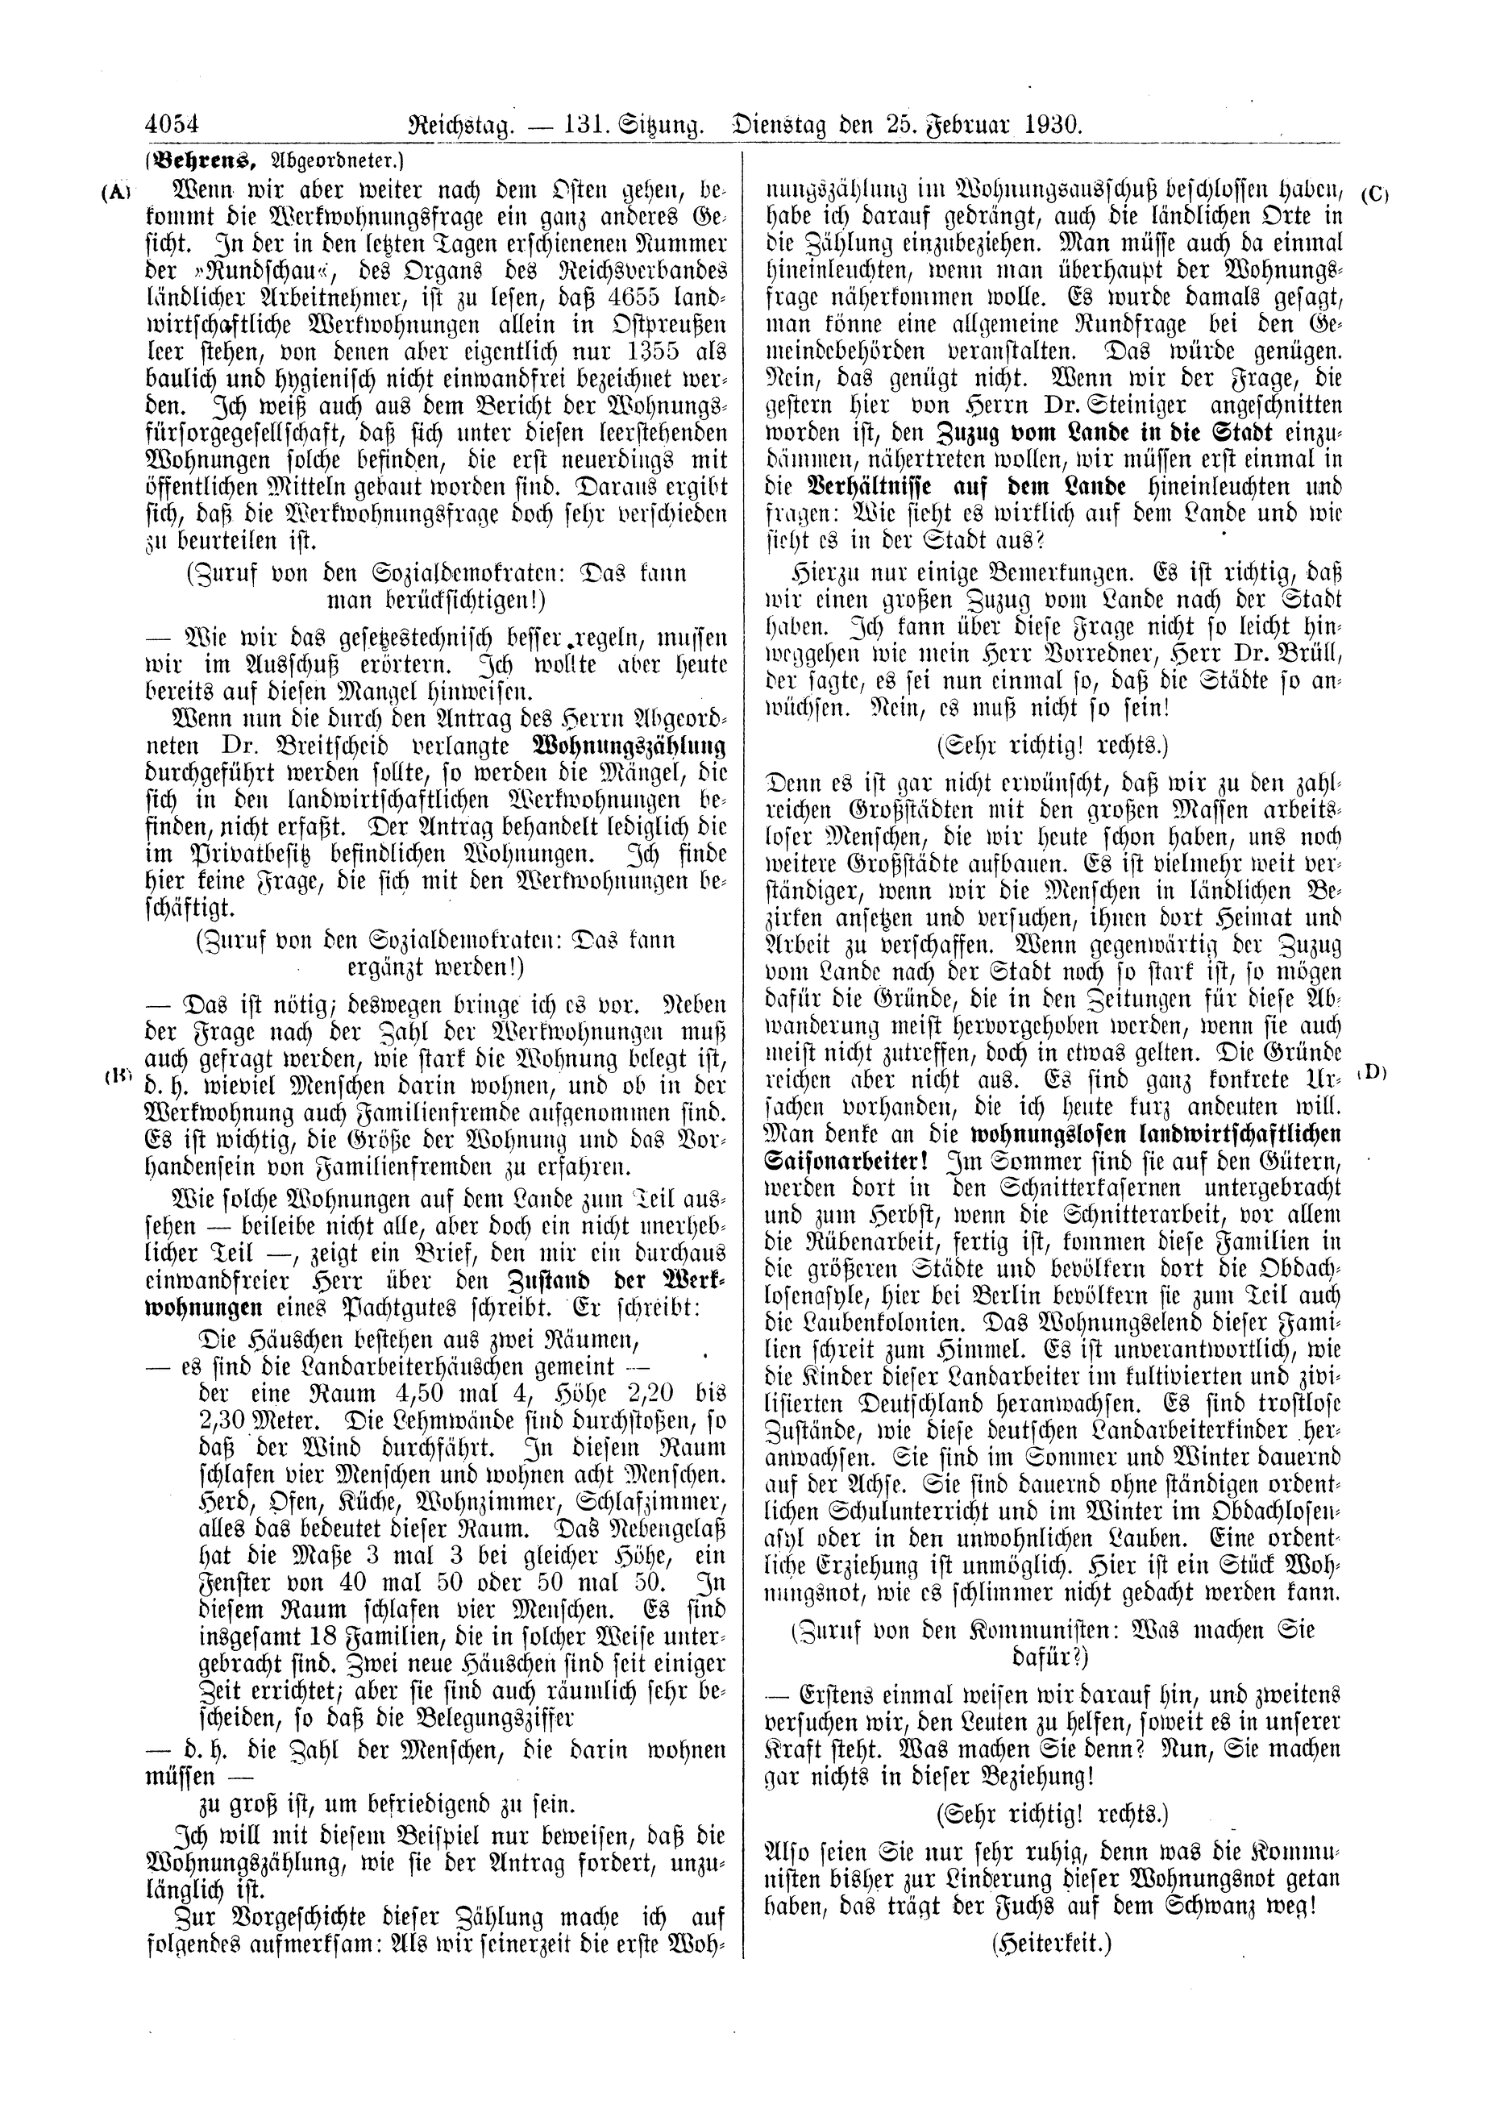 Scan of page 4054